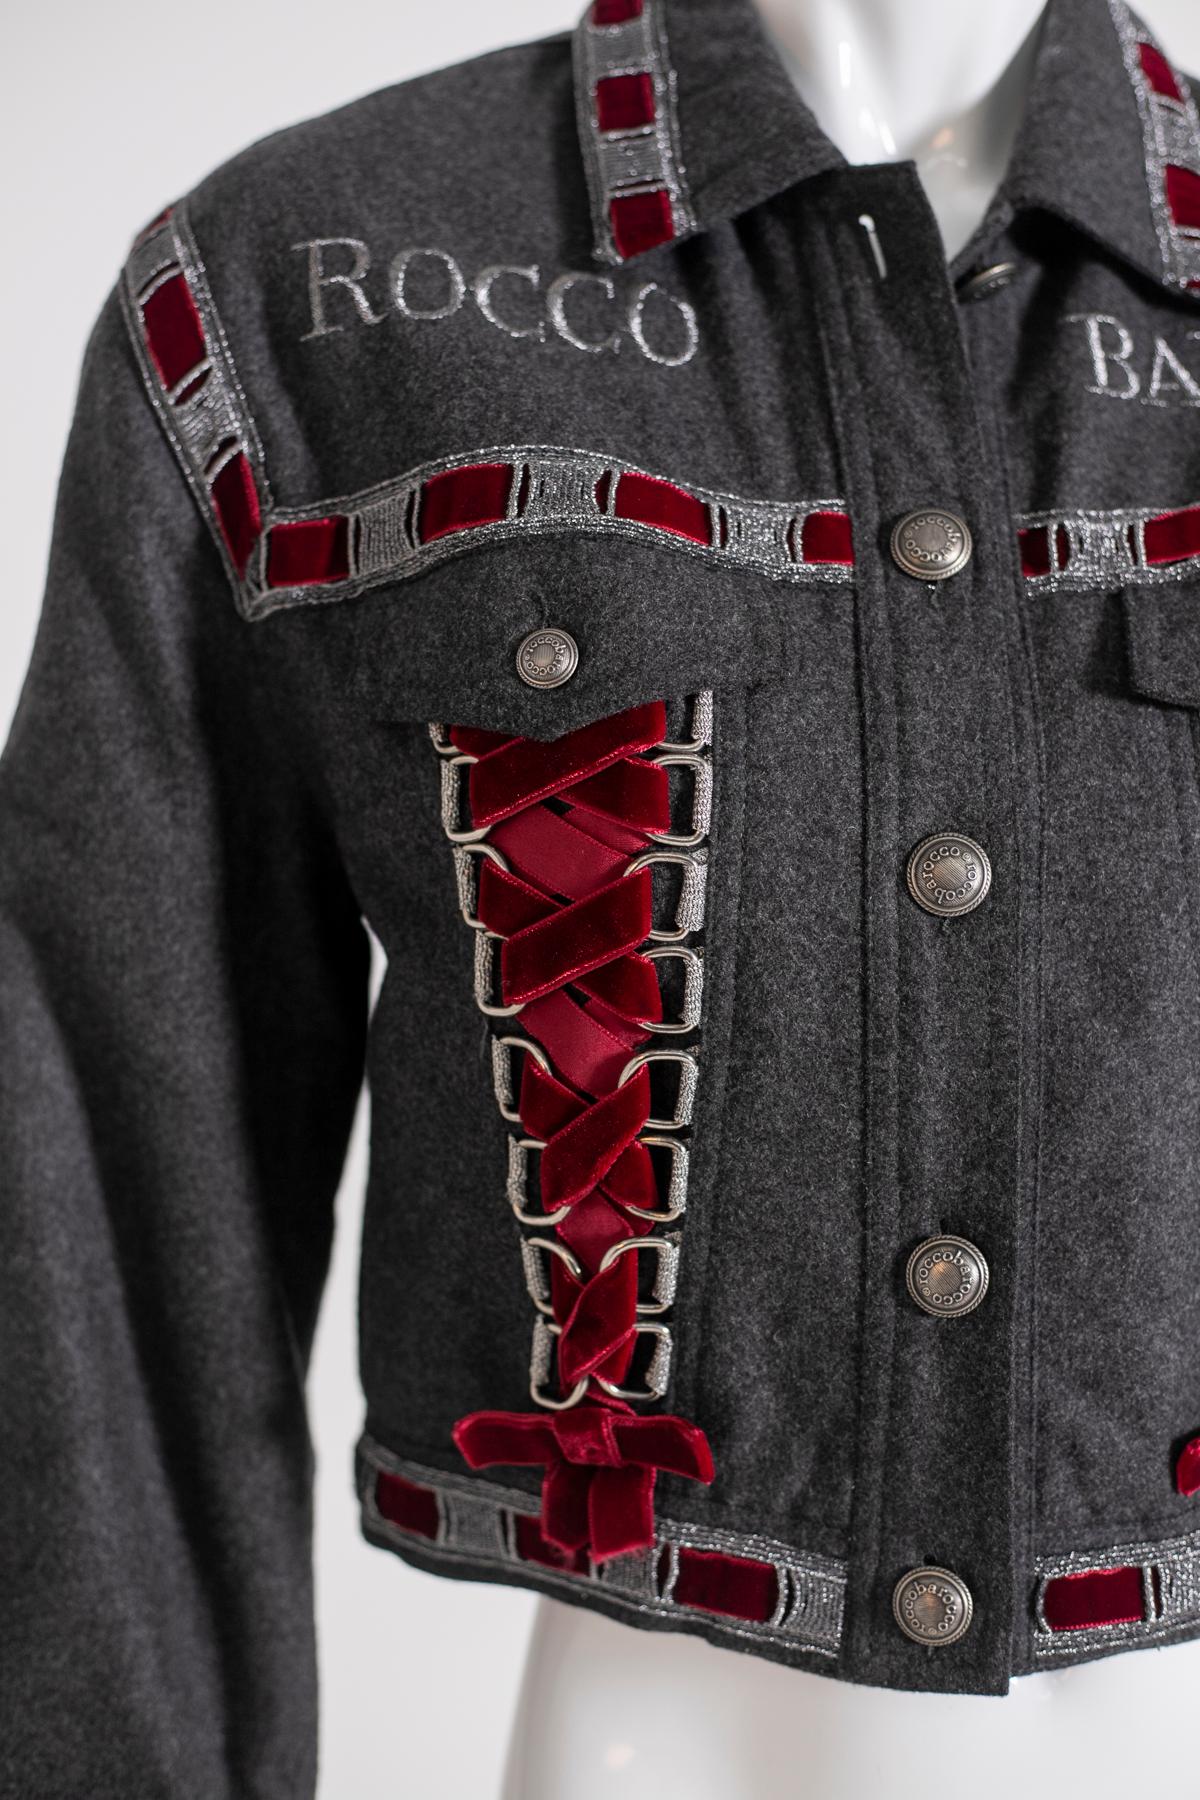 RoccoBarocco Jacket in Jeans and Red Velvet For Sale 2